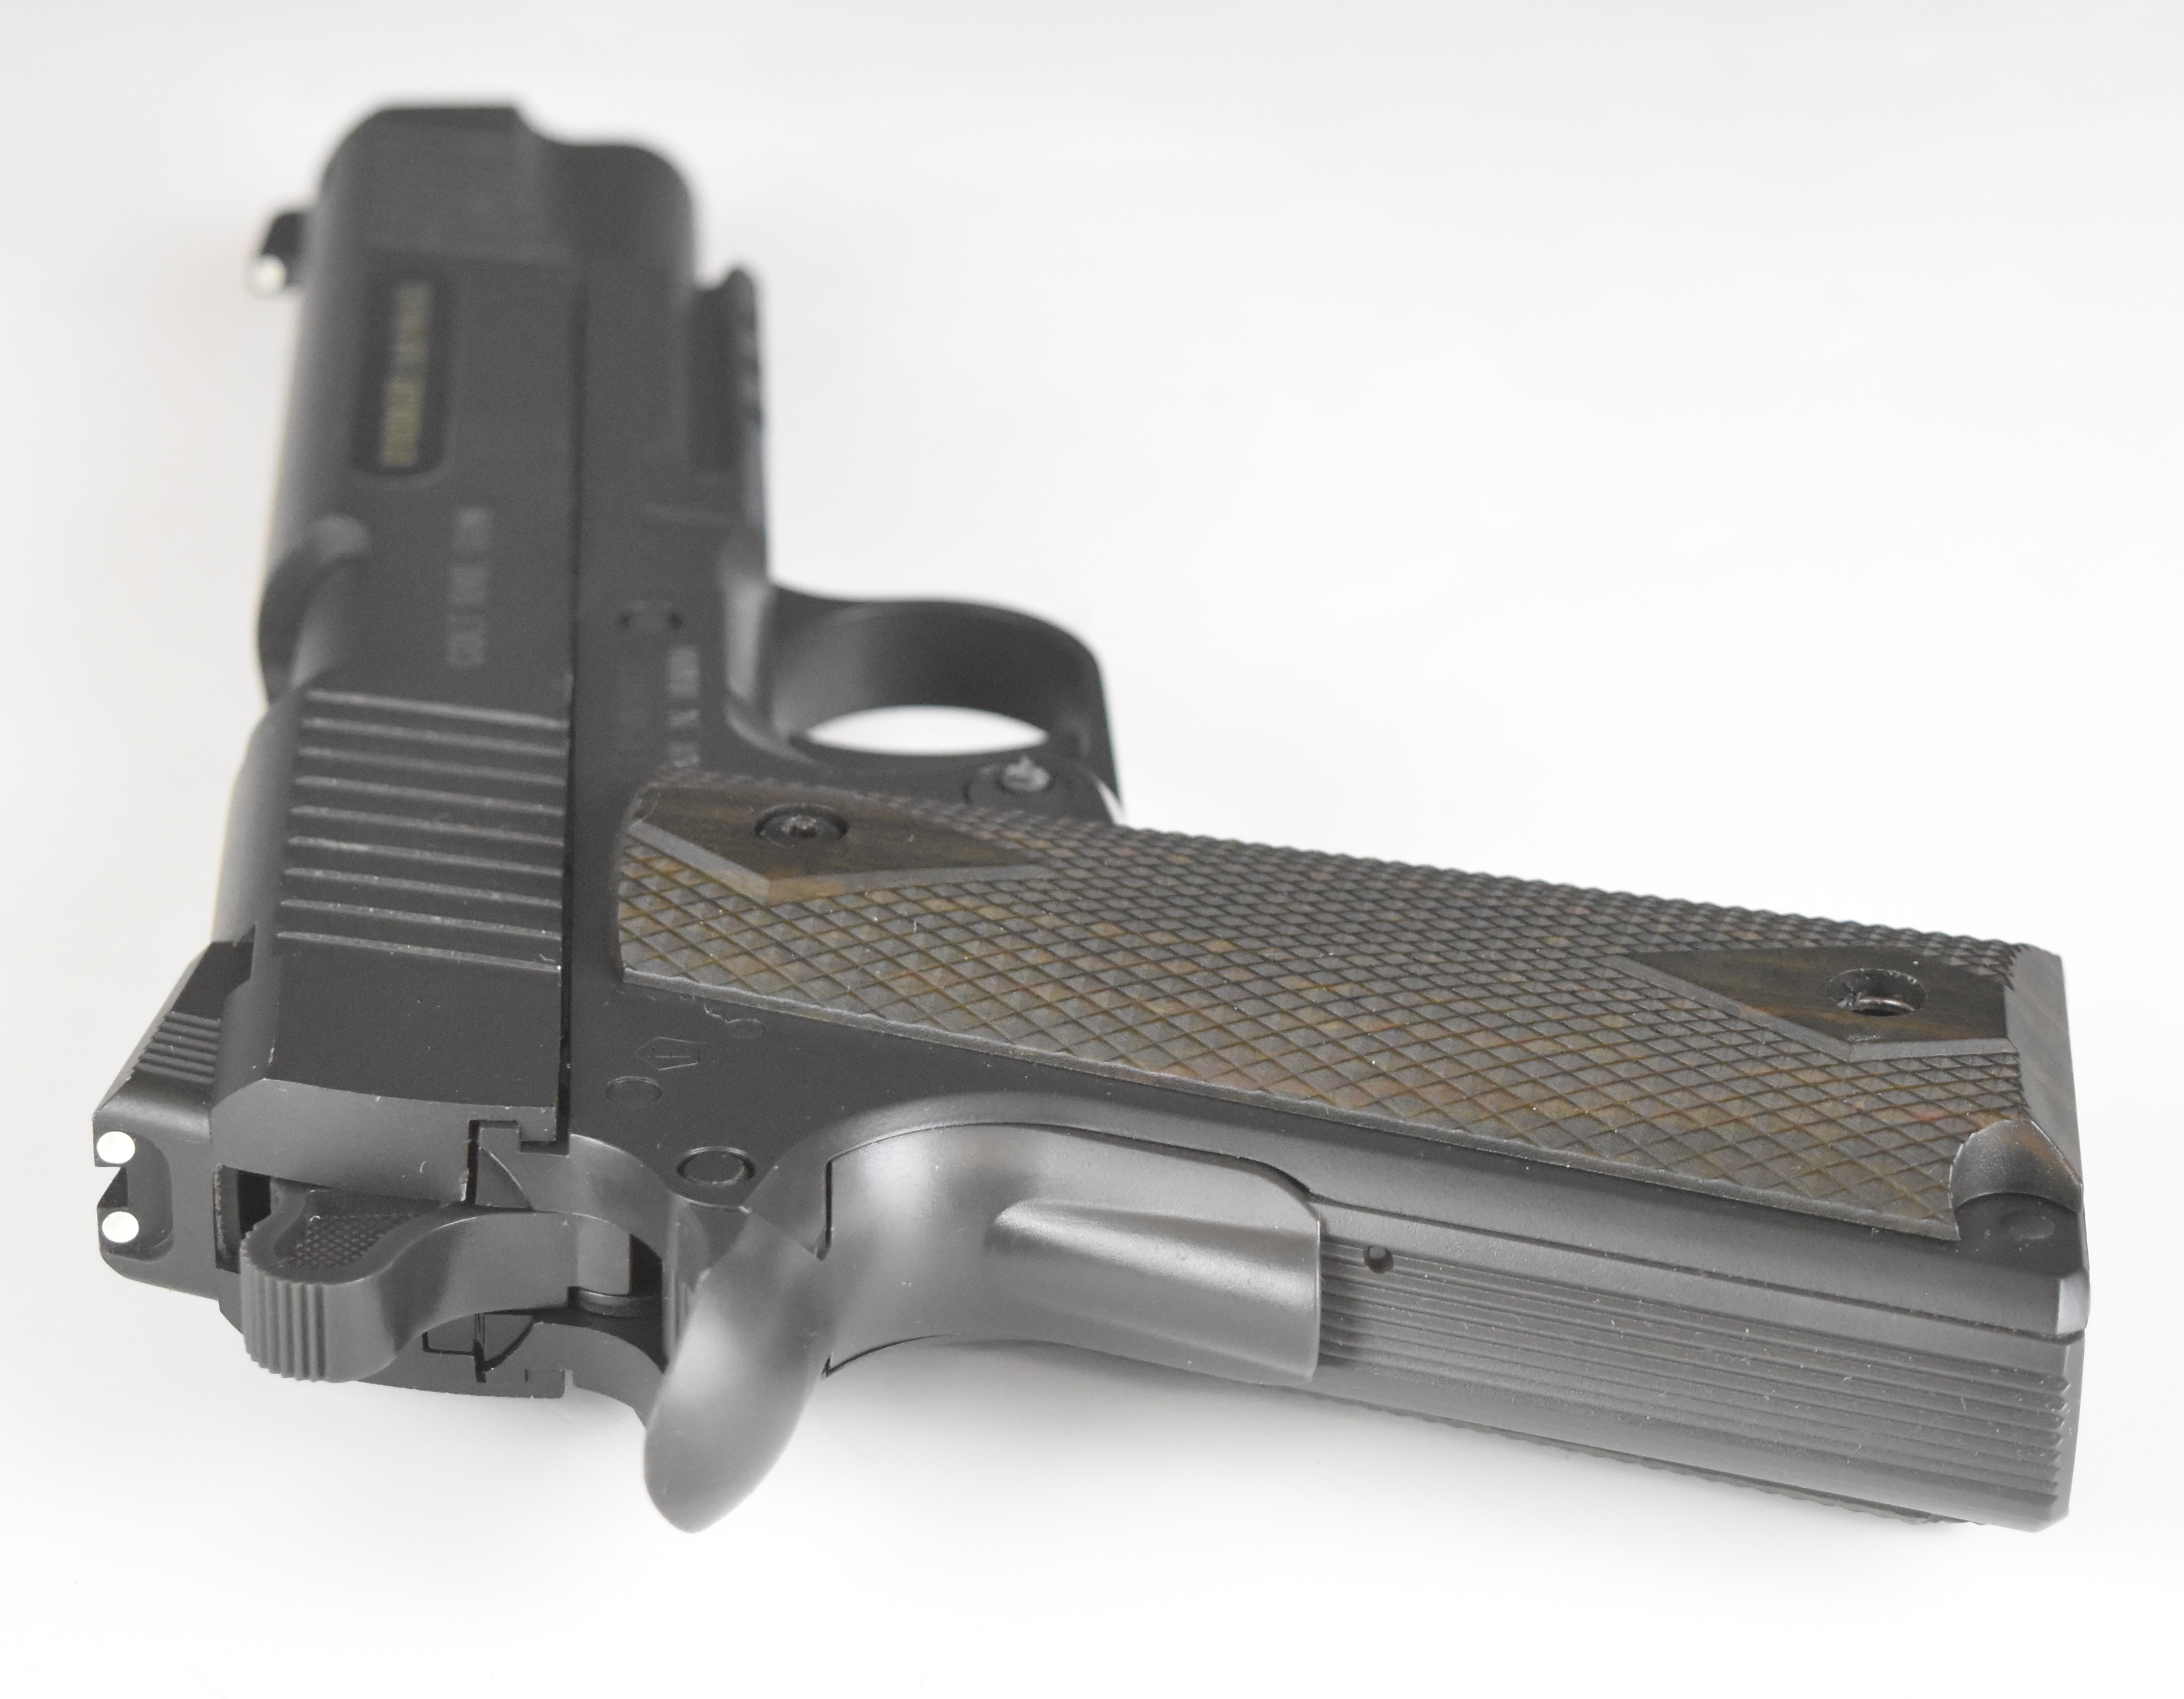 Colt 1911 Rail Gun NBB Series 6mm CO2 air pistol with chequered grips, 15 shot magazine and fixed - Image 4 of 14